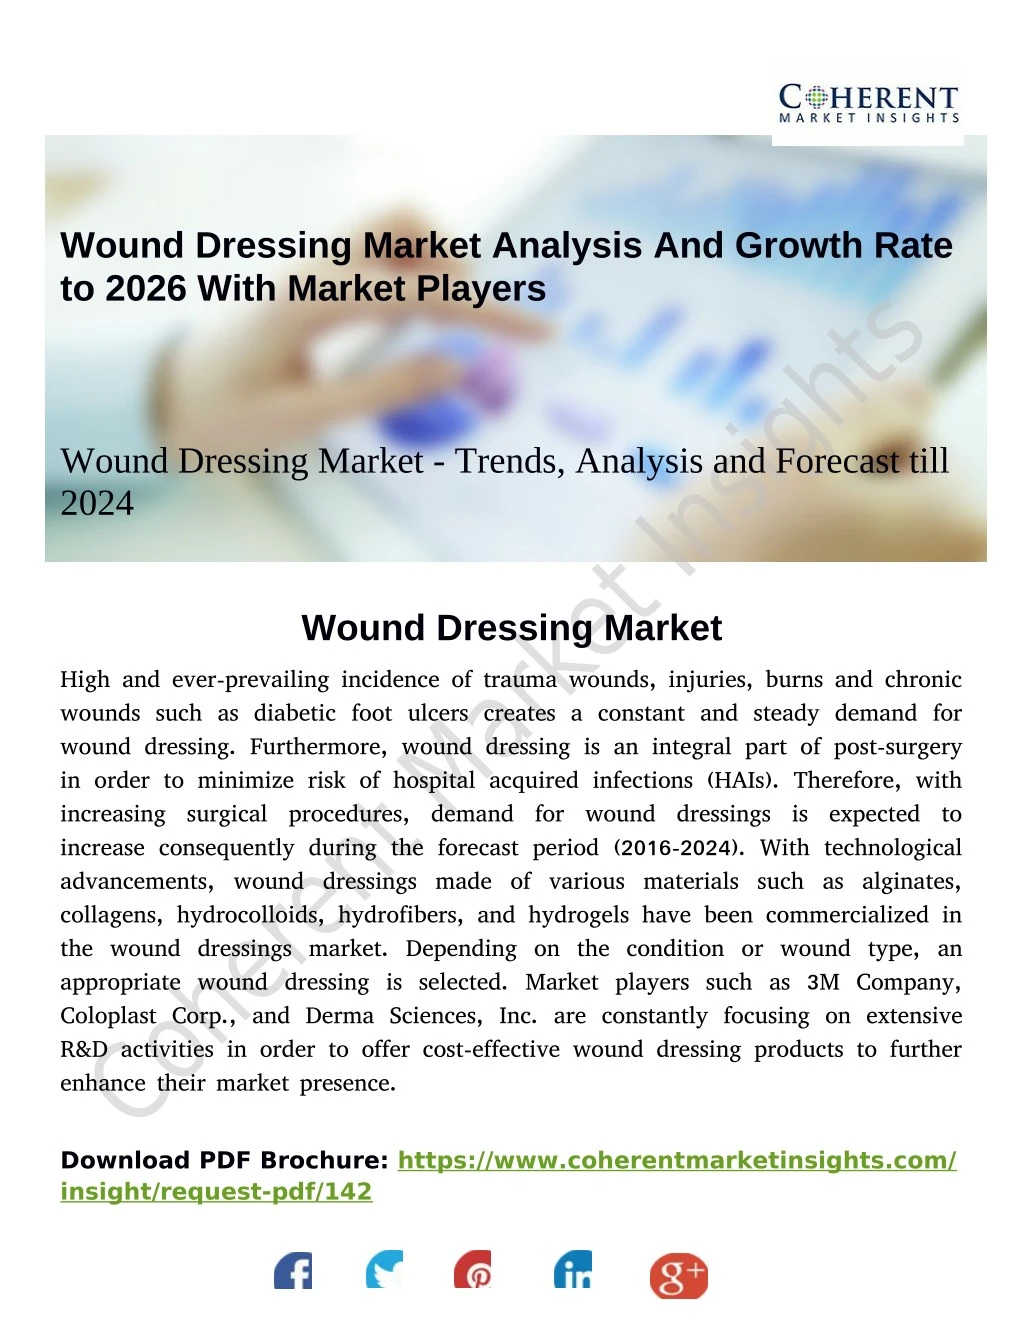 wound dressing market analysis and growth rate